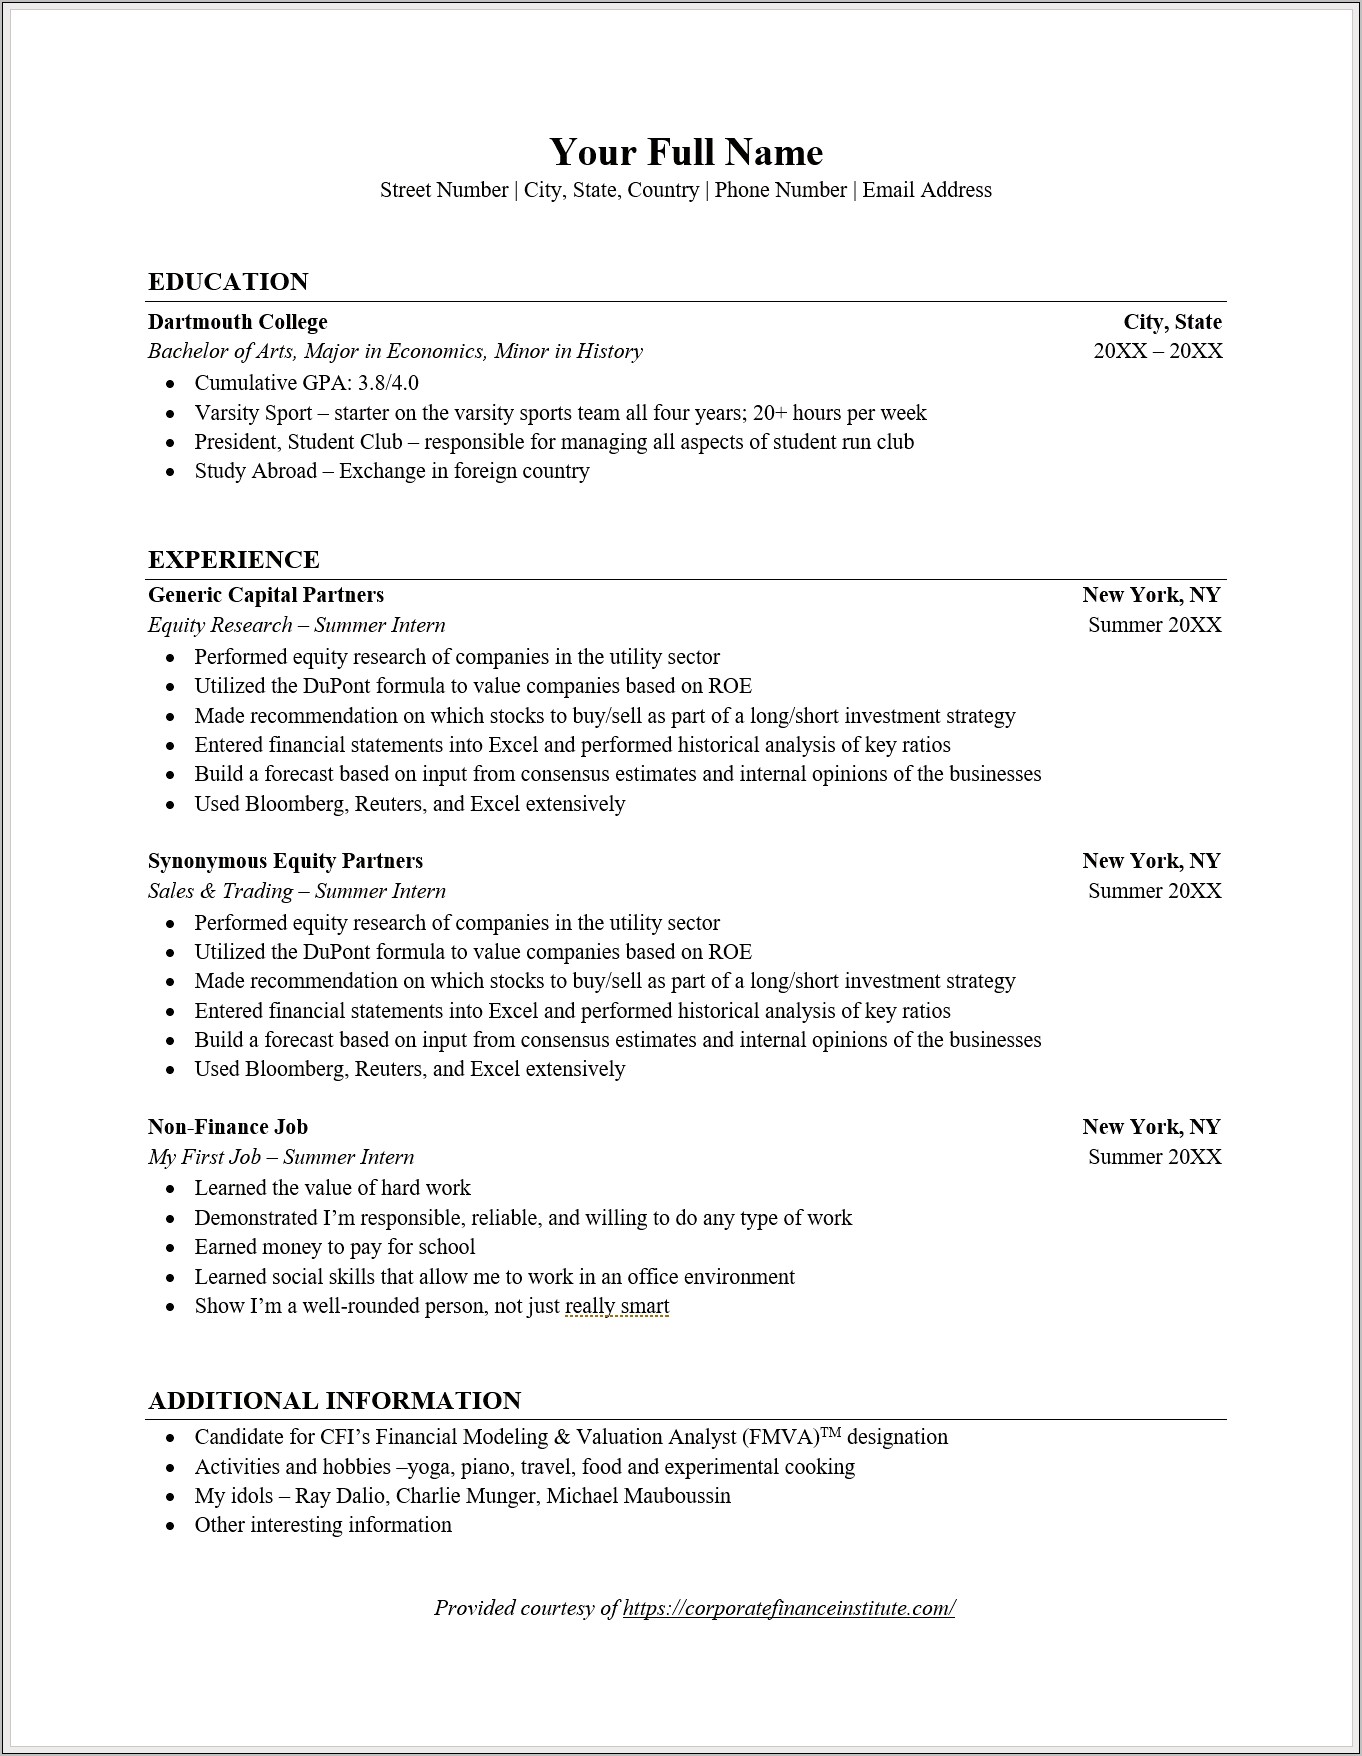 Tailor Resume To Job Automatically